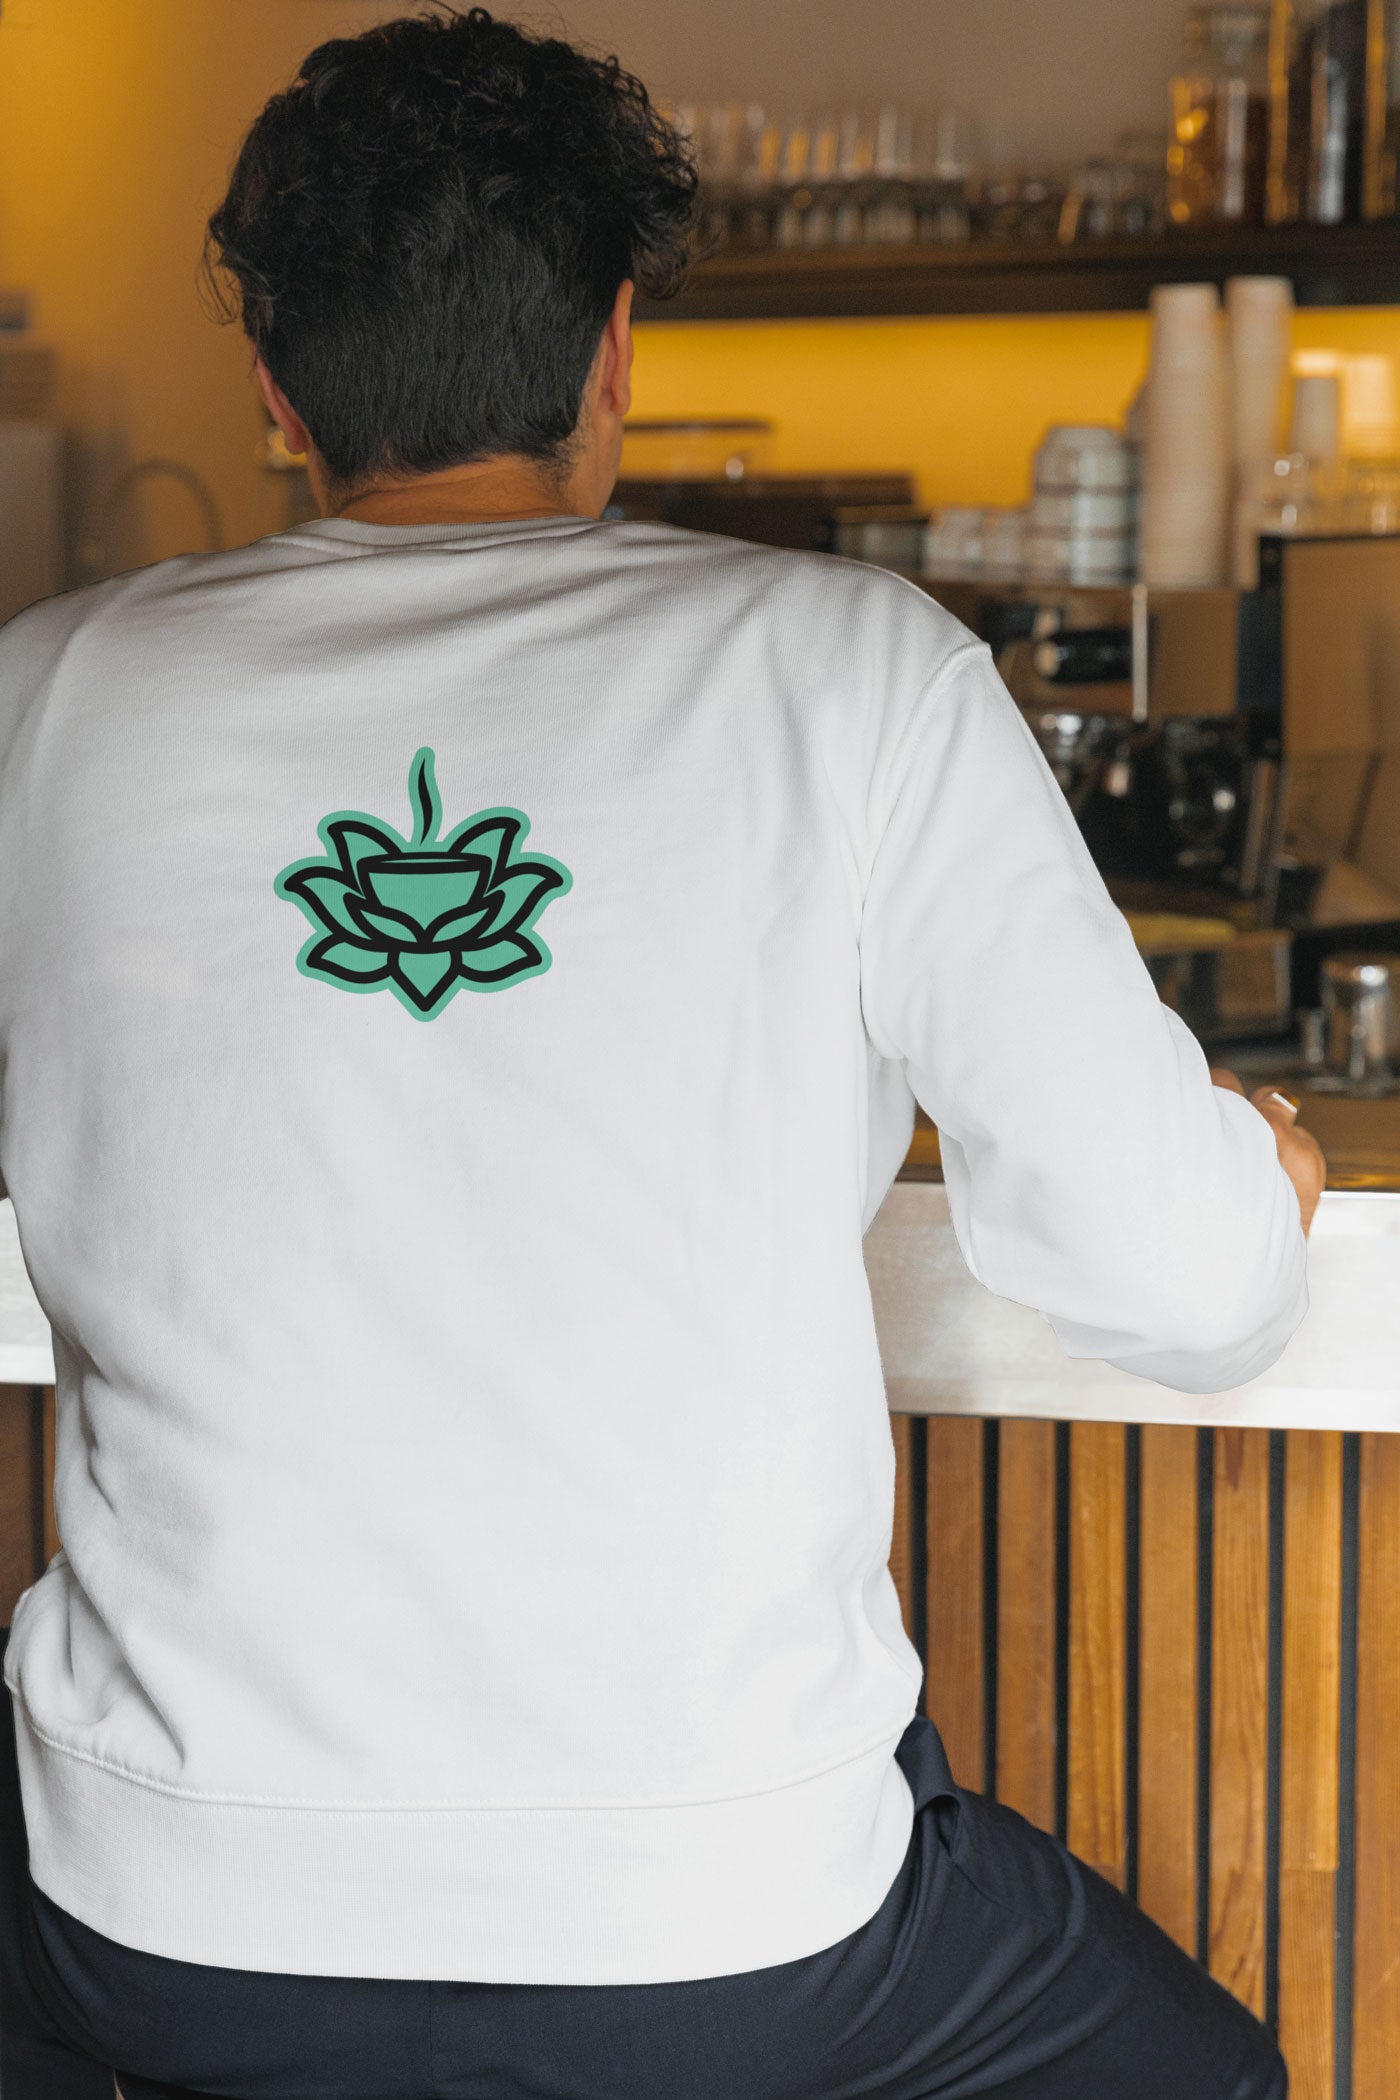 Man with a white long sleeve shirt and Flowstate logo in the middle